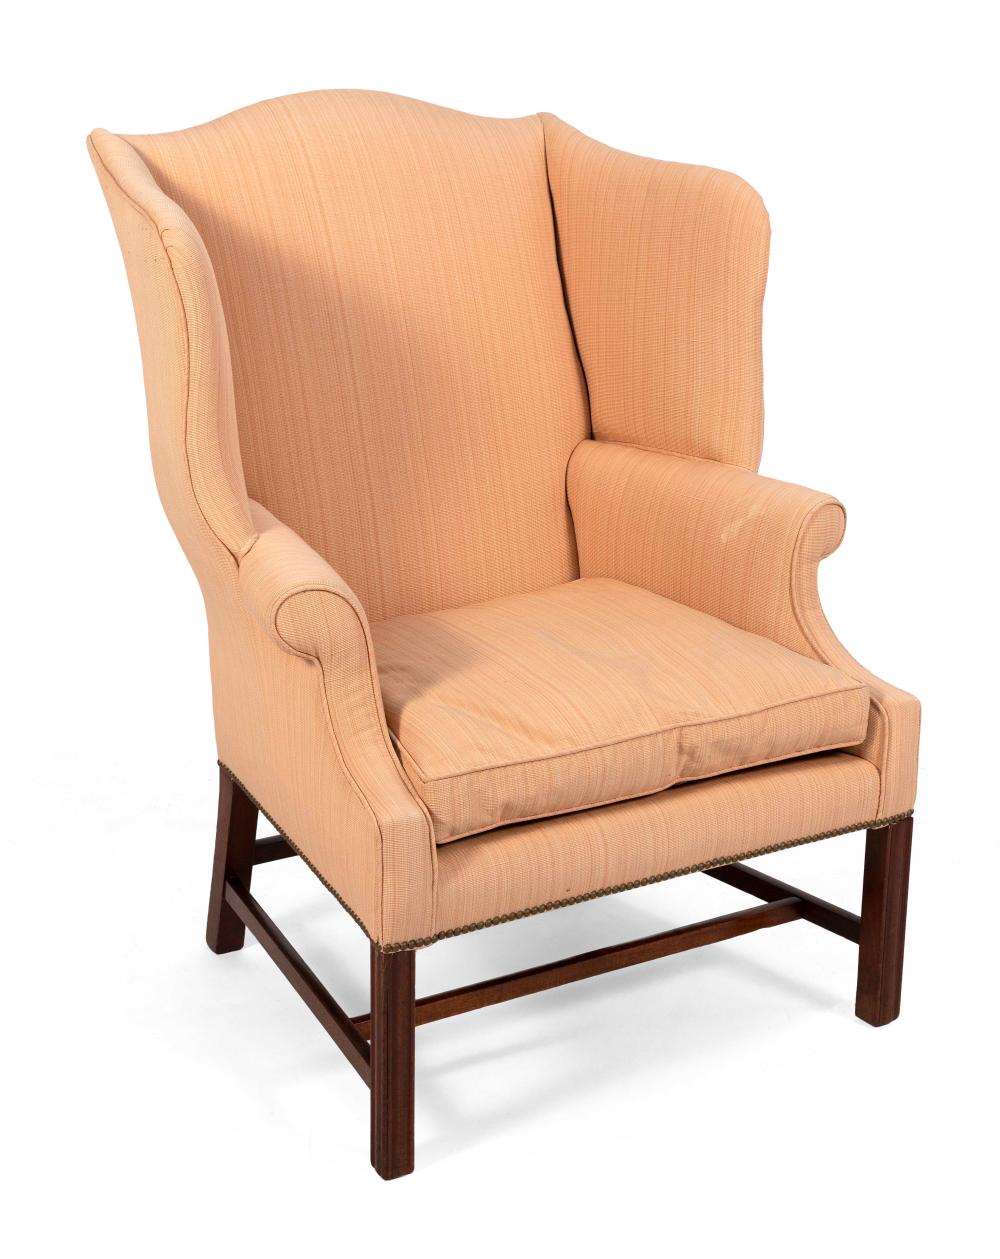 CHIPPENDALE STYLE WING CHAIR LATE 34d336